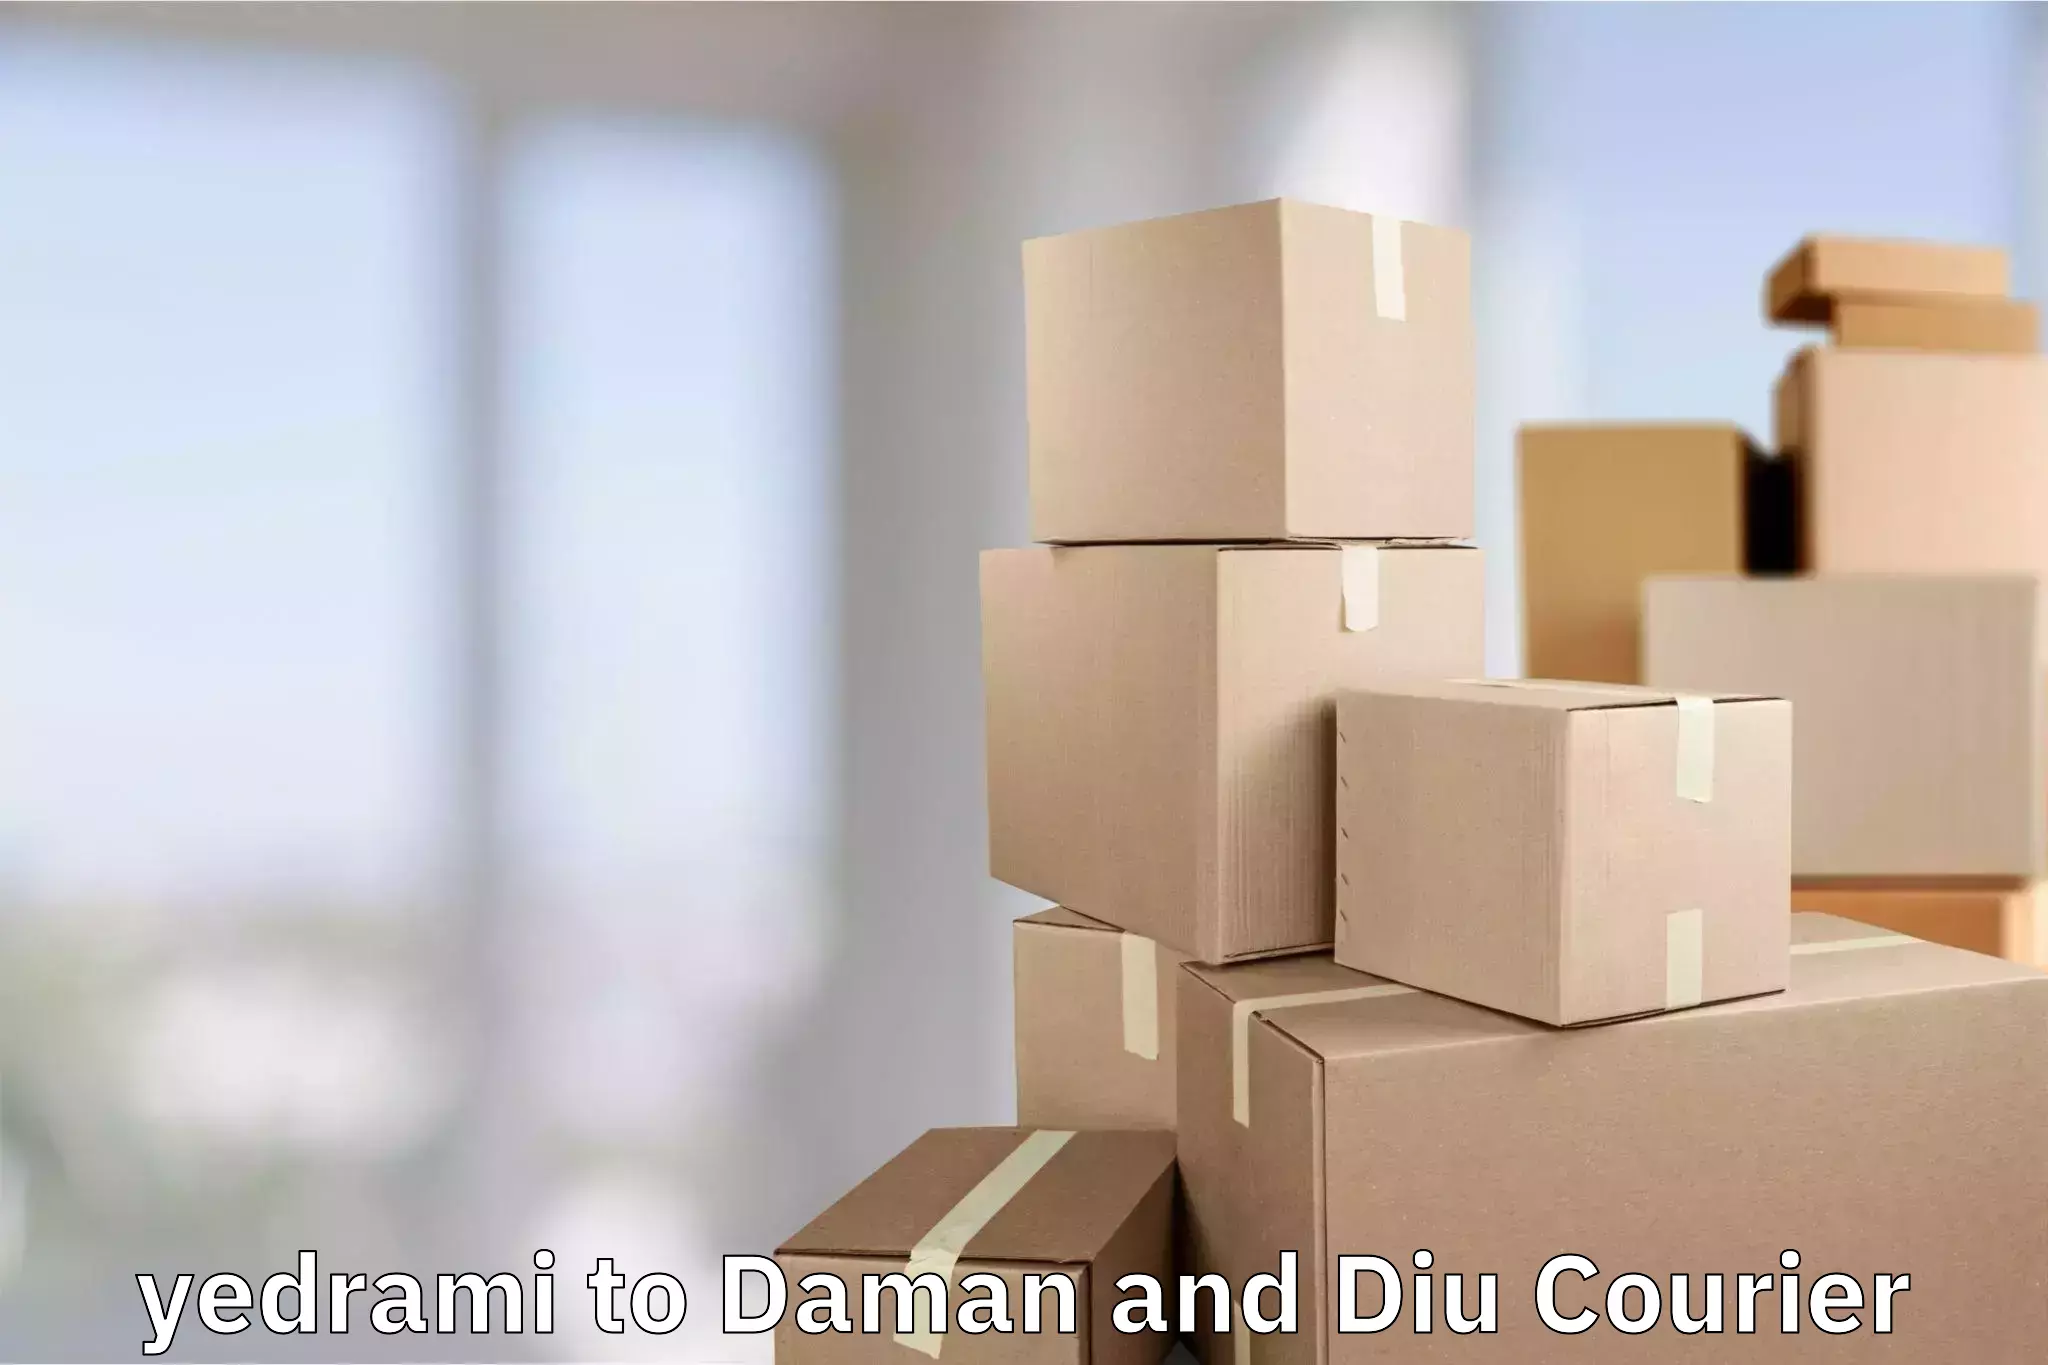 Premium luggage delivery yedrami to Daman and Diu